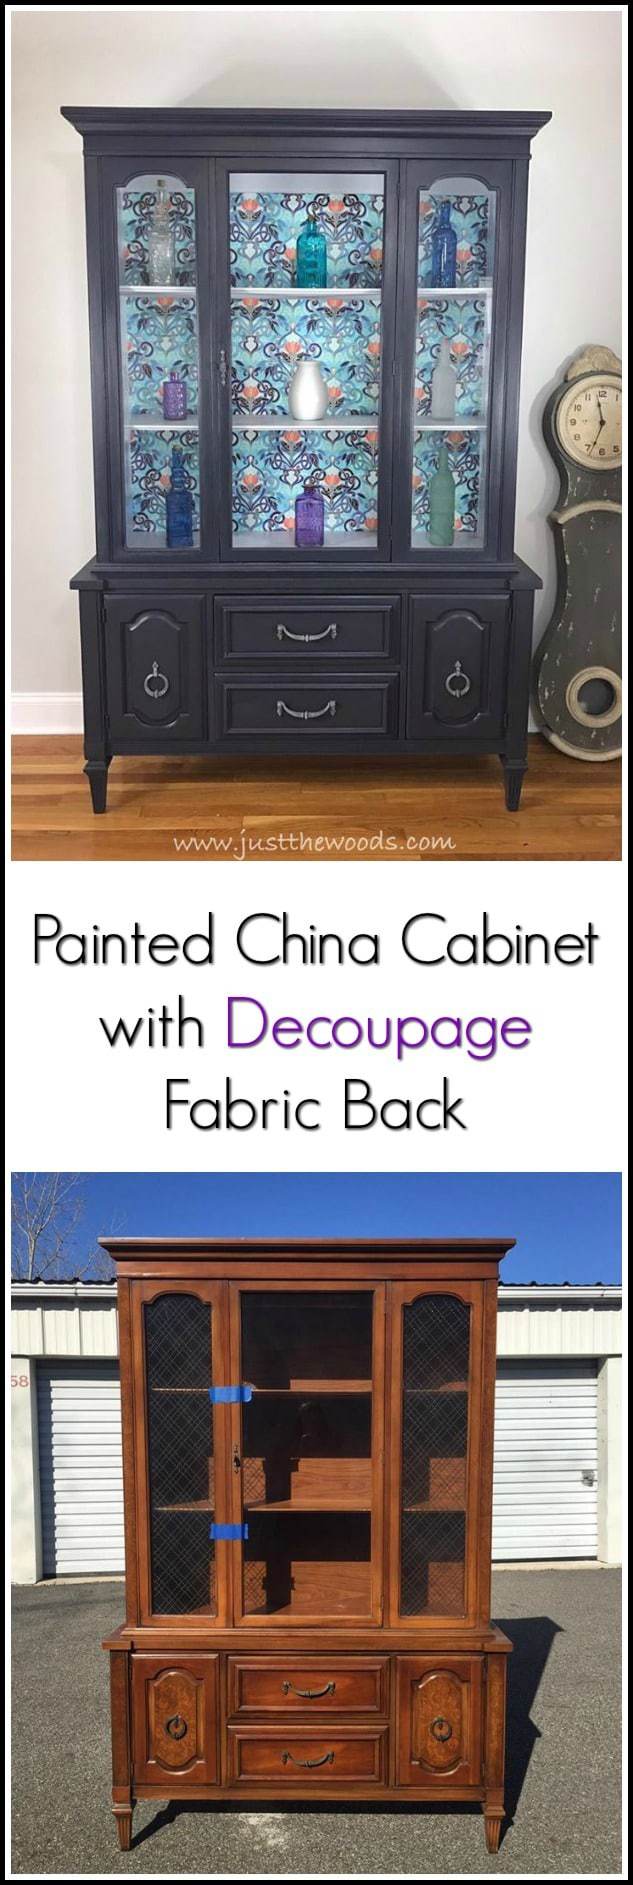 A painted china cabinet with gorgeous fabric decoupage. Deep gray with purple undertones make this painted china cabinet amazing. #paintedfurniture #paintedcabinet #furnituremakeover #paintedchinacabinet #furnituredecoupage #paintedfurnitureideas #fabricdecoupage via @justthewoods